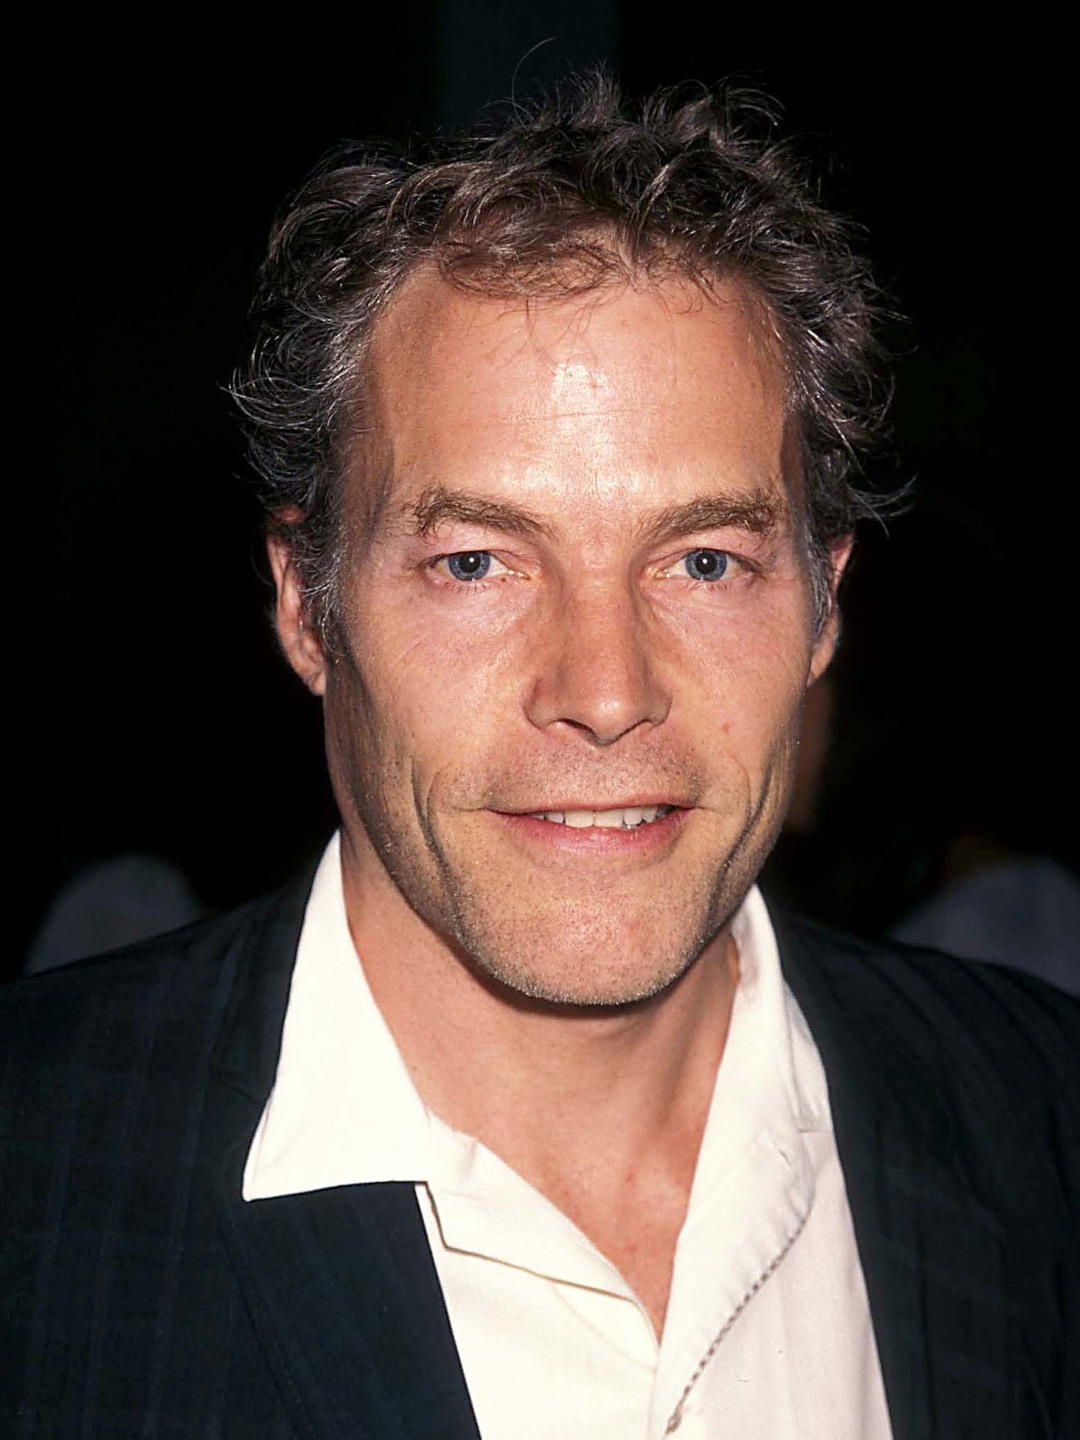 How tall is Michael Massee?